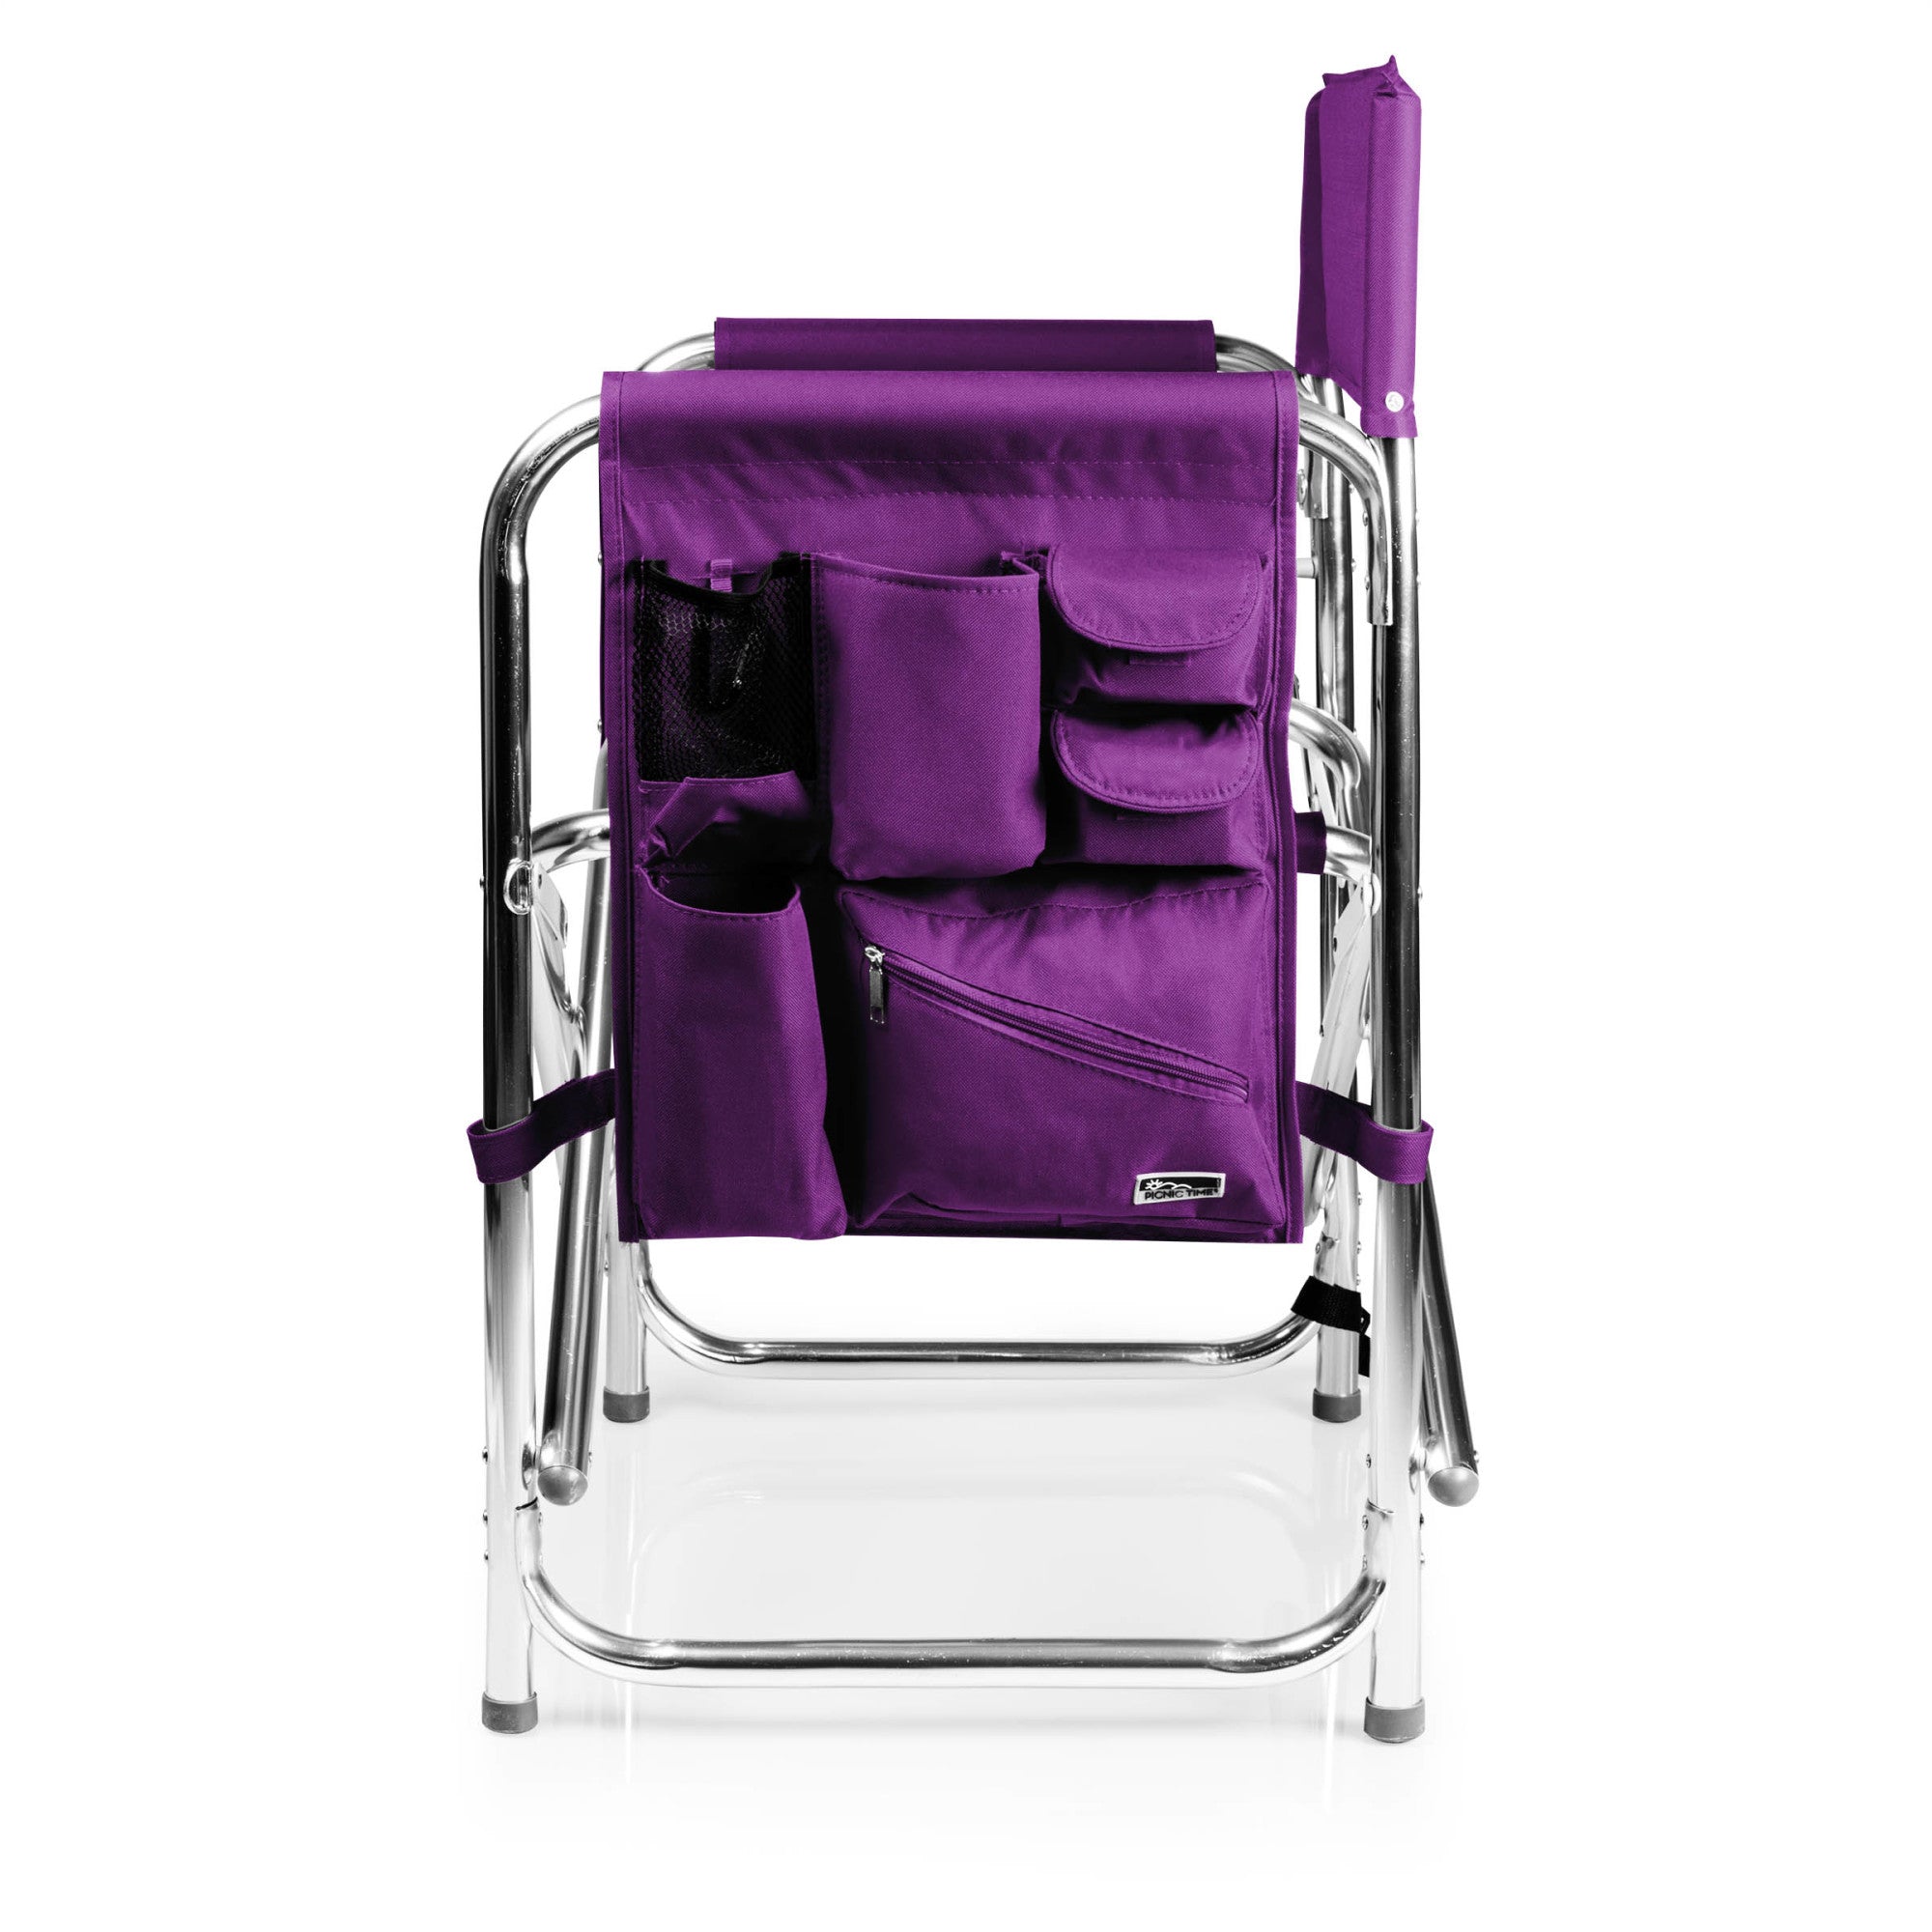 TCU Horned Frogs - Sports Chair